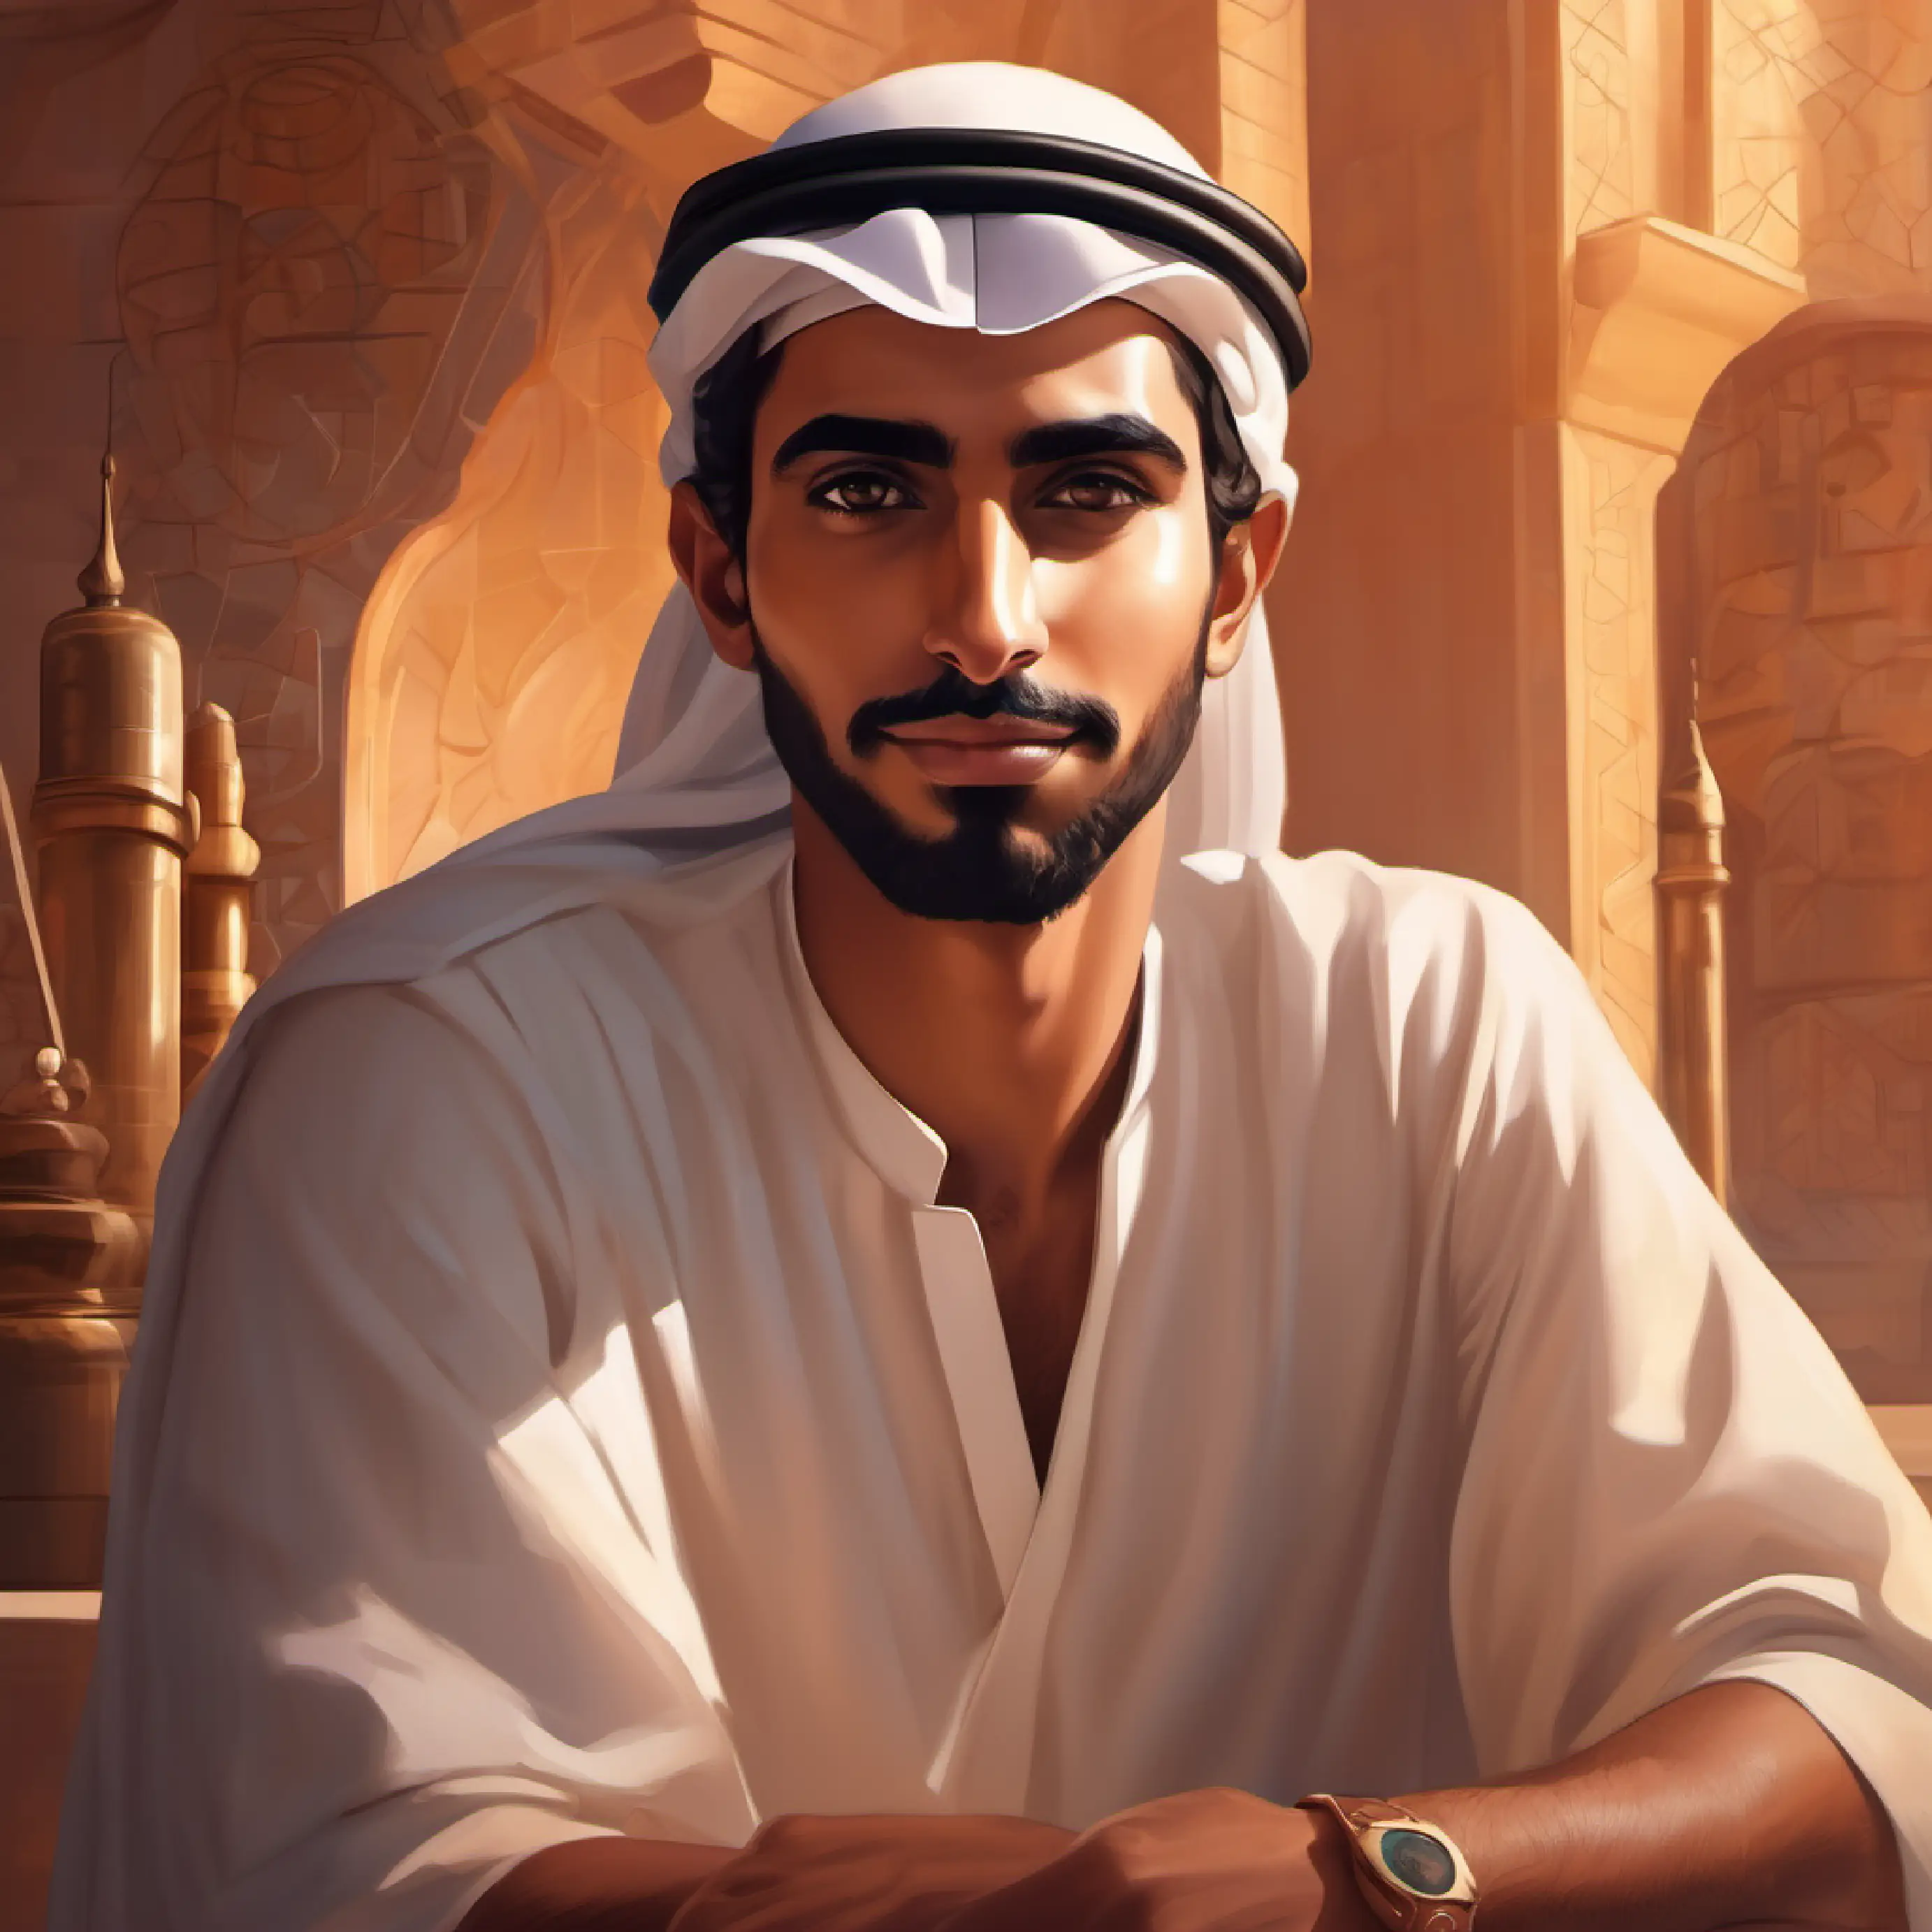 Young Emirati man, bronze skin, earnest dark eyes, with a scientific gaze's achievements offer inspiration to others.